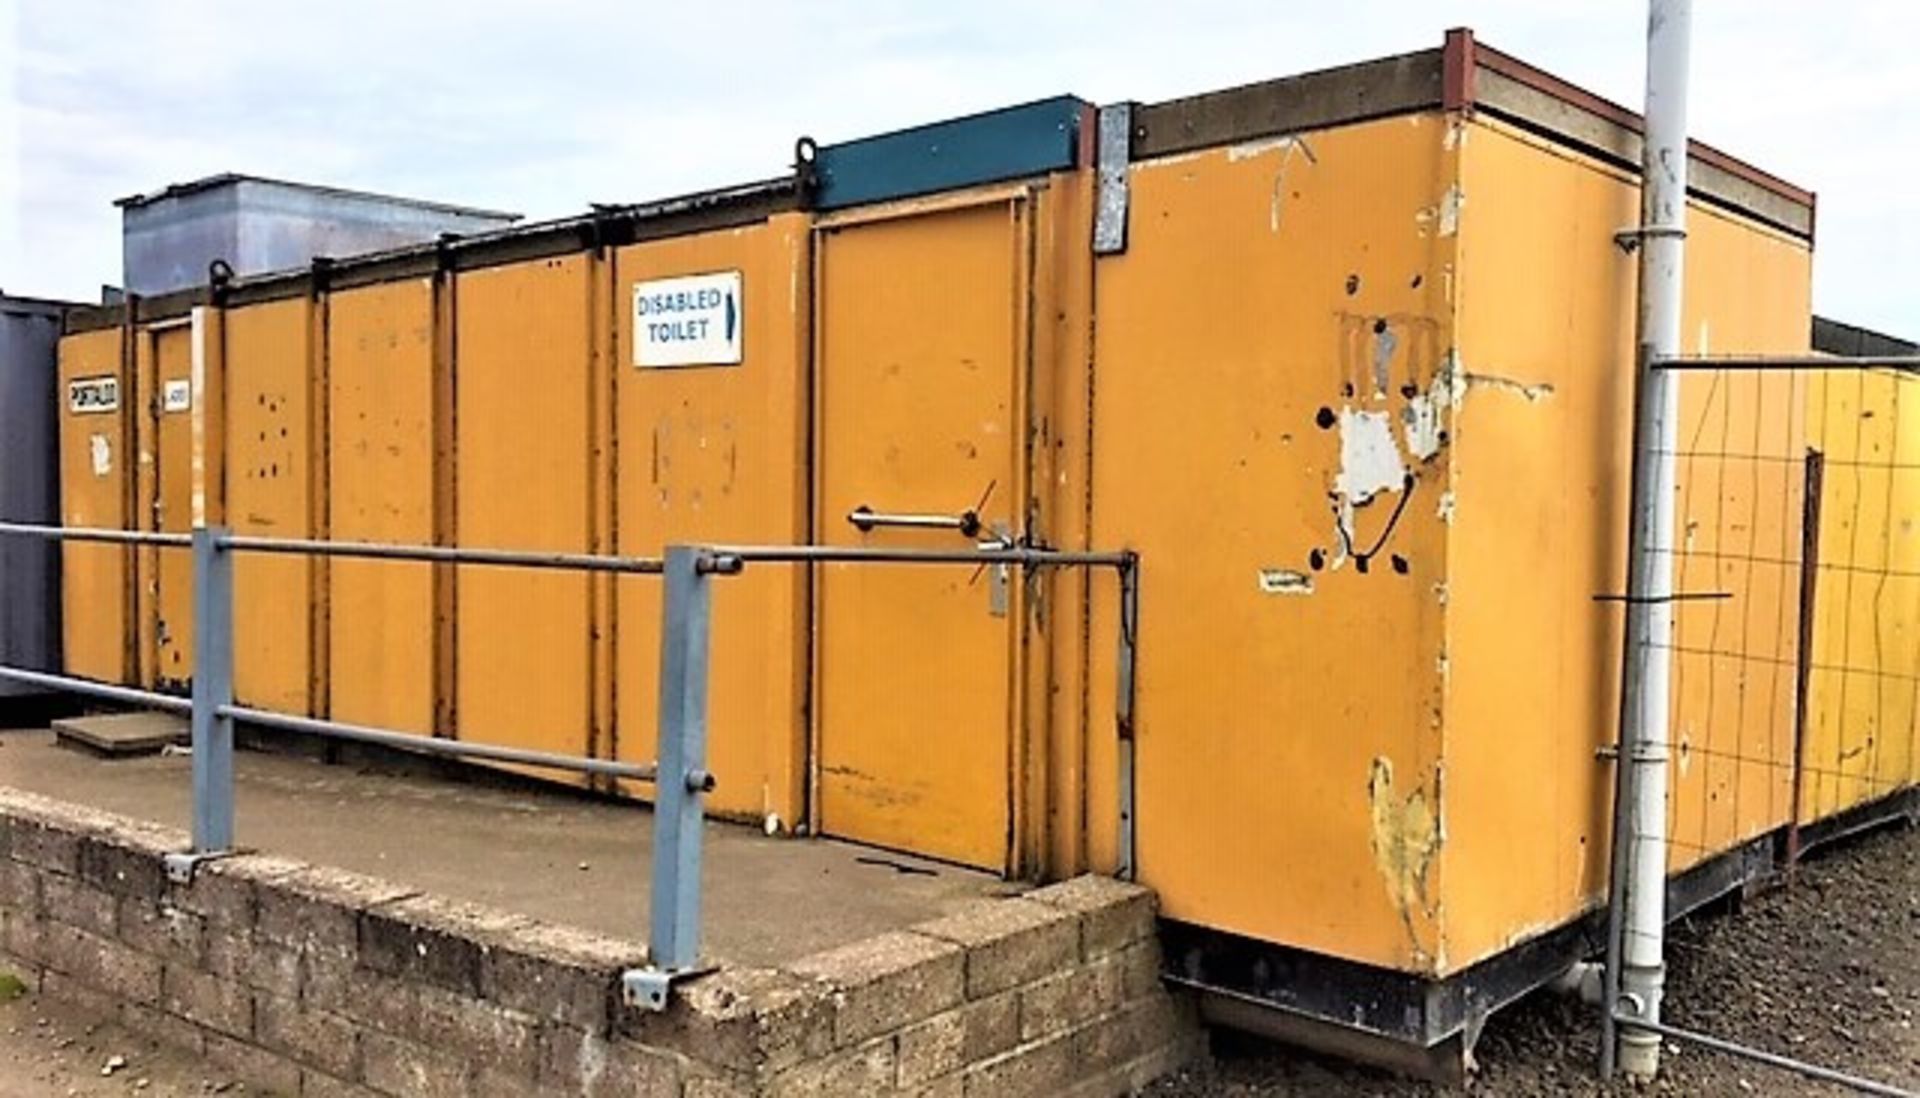 LADIES TOILET BLOCK 30x9 STEEL CHASSIS AND HEAVY DUTY JACKLEGS C/W - 8 x WC CUBICLES, 4 x WASH BASI - Image 6 of 13